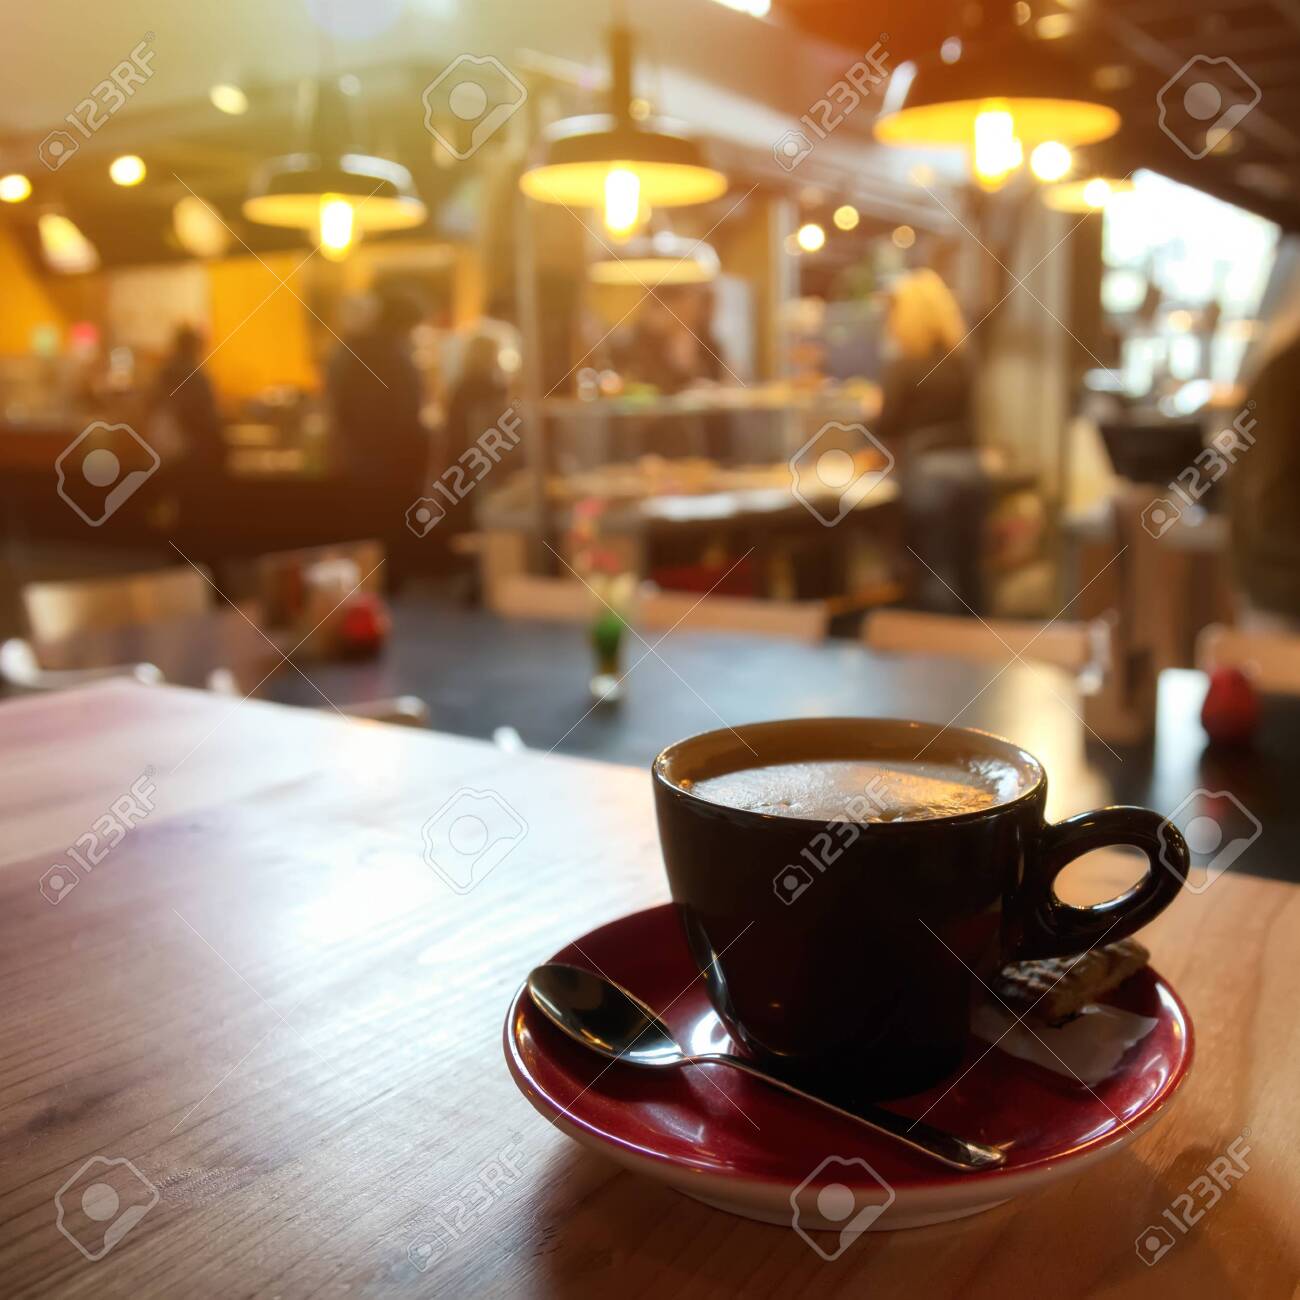 Coffee Cup On Wooden Table With Blur Shop Background